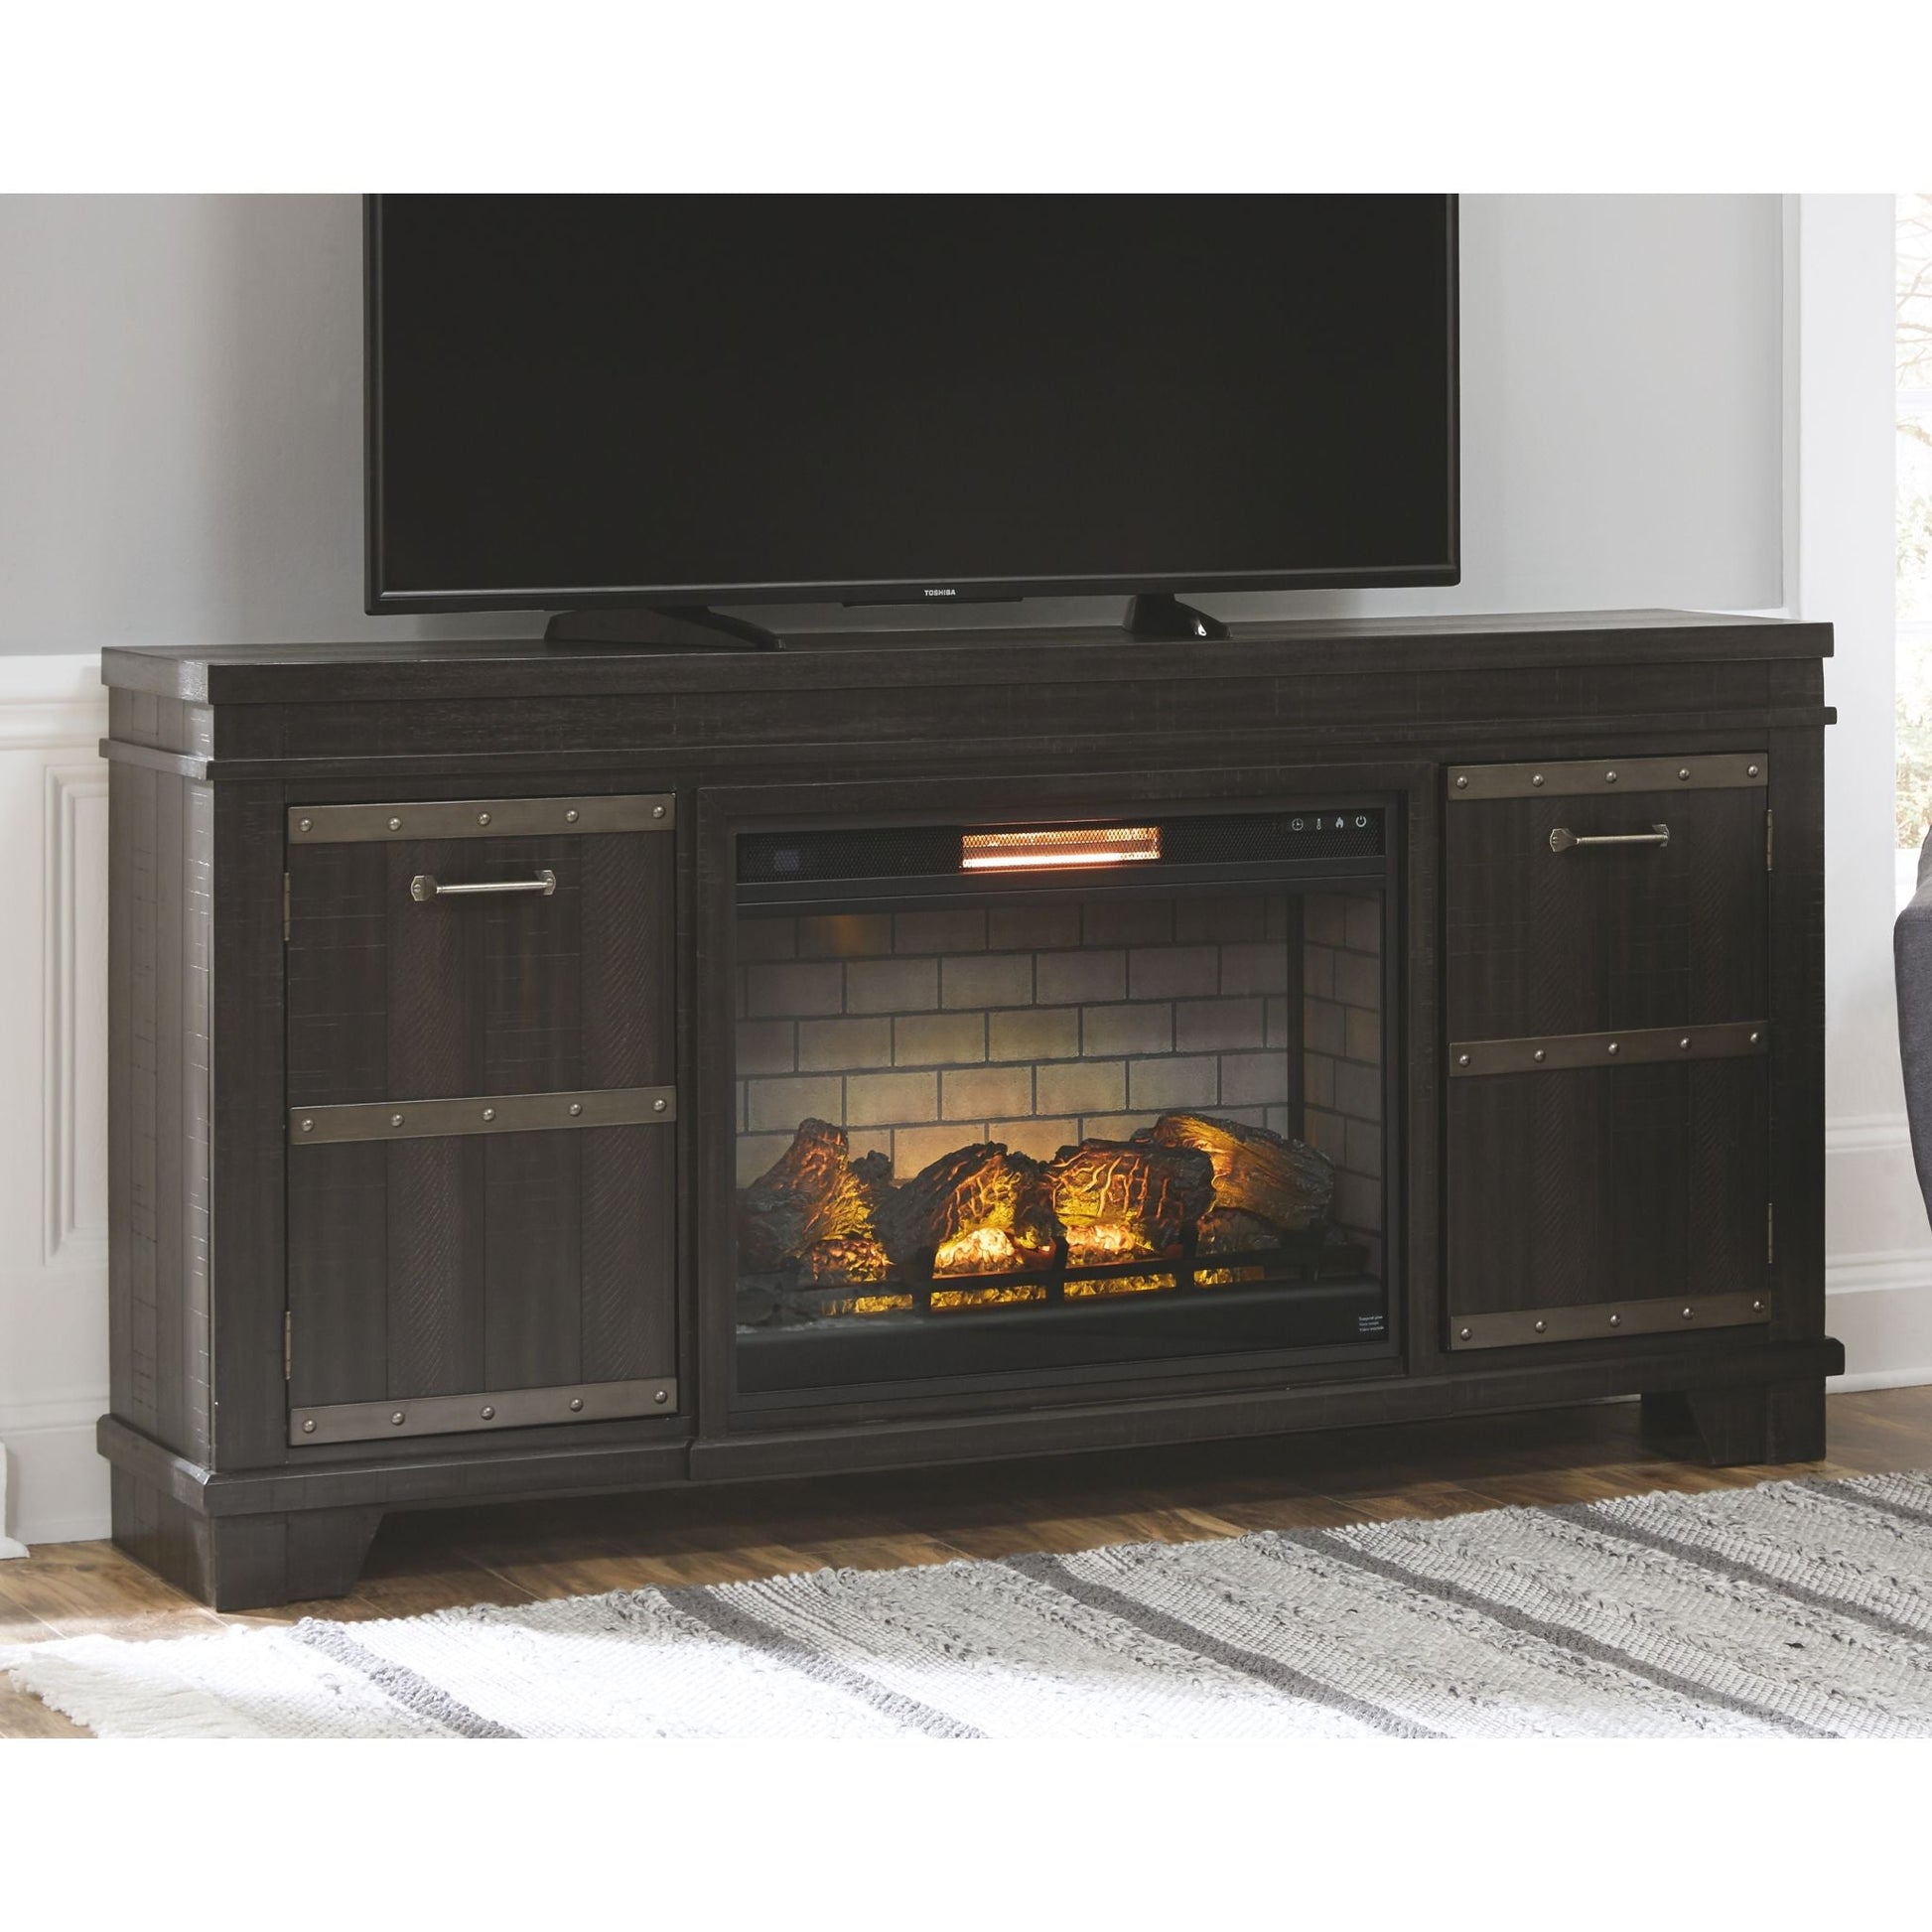 Noorbrook TV Stand with Fireplace - Black